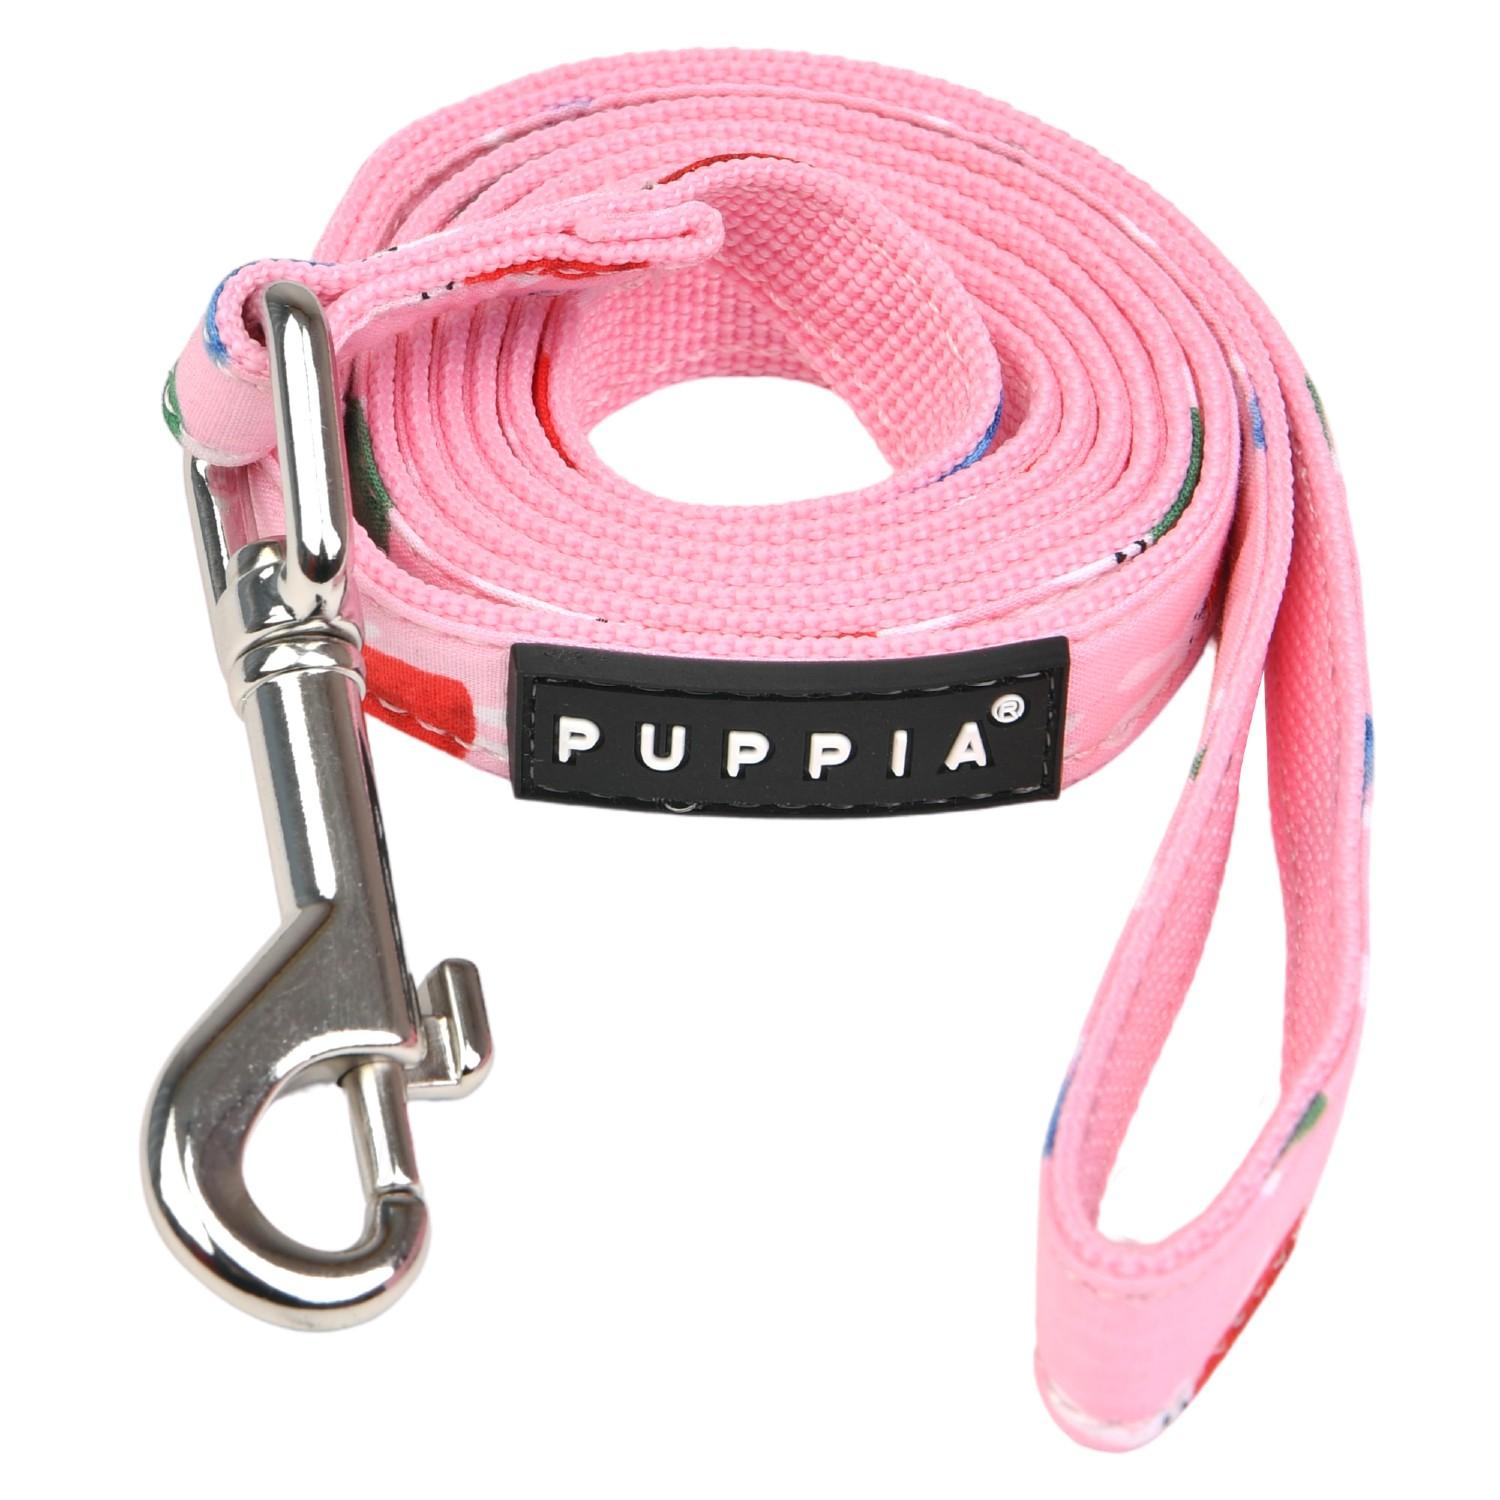 Mollie Dog Leash by Puppia - Pink